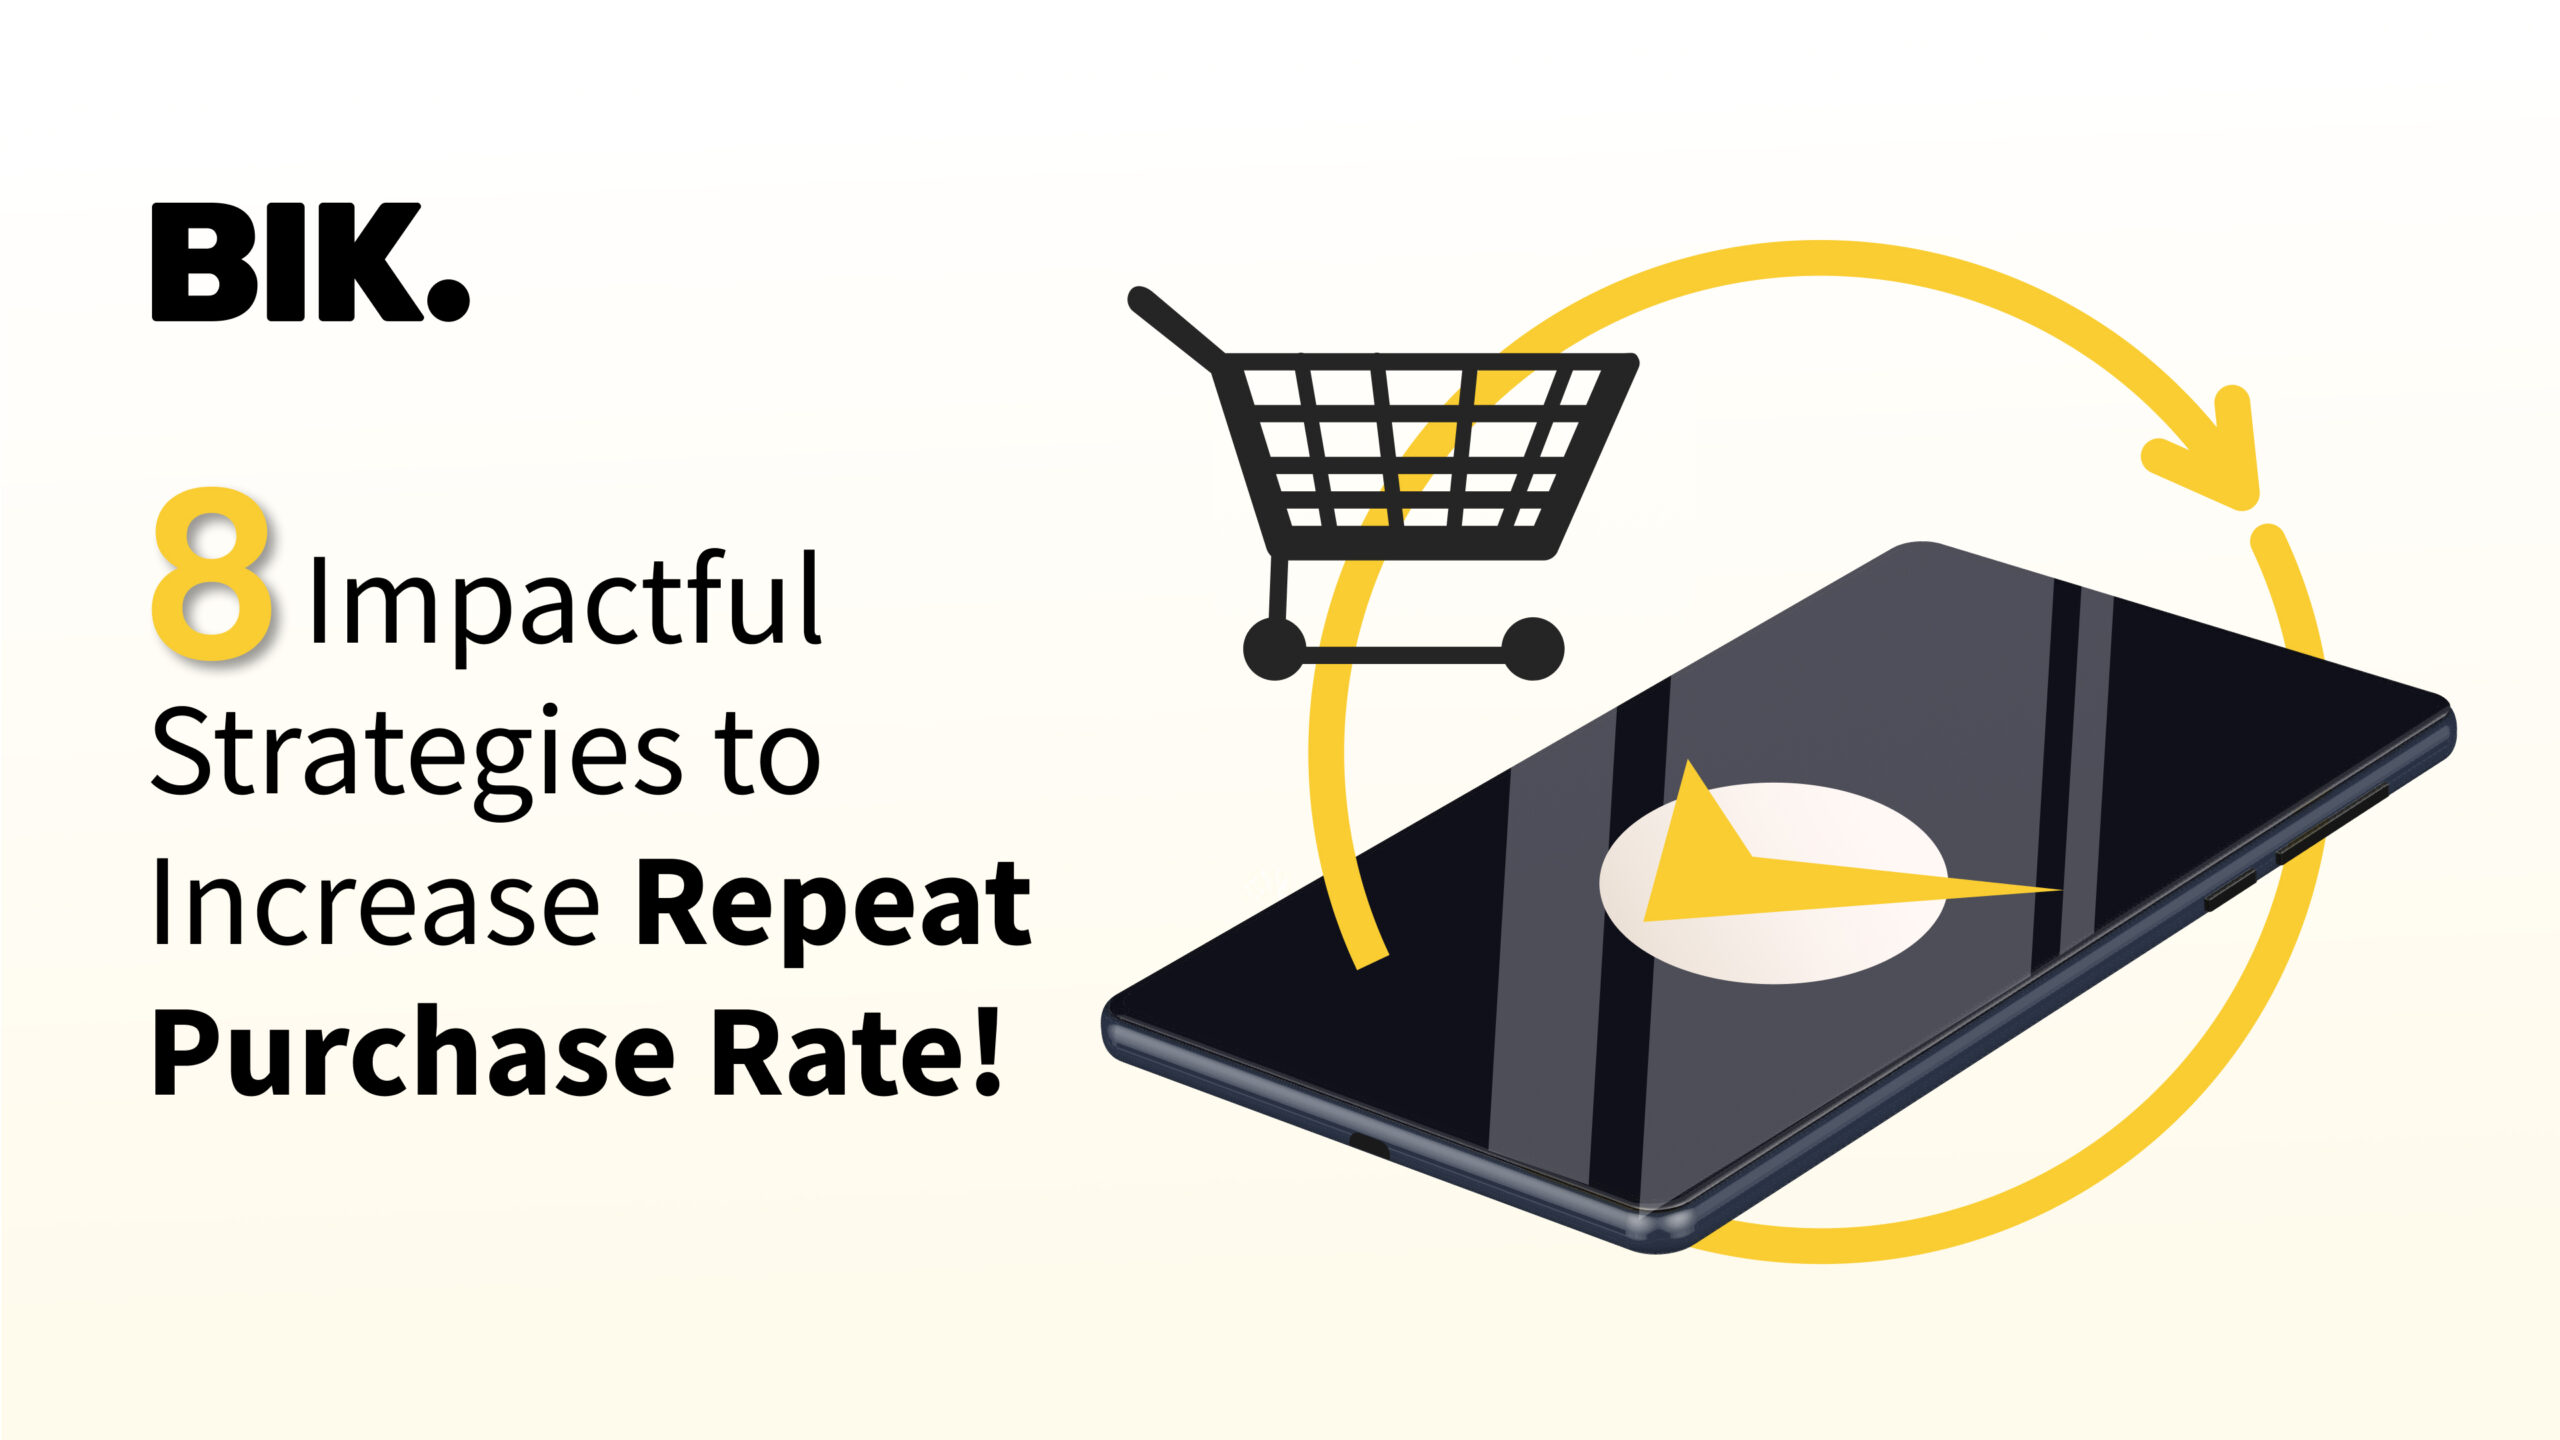 8 Impactful Strategies to Increase Repeat Purchase Rate